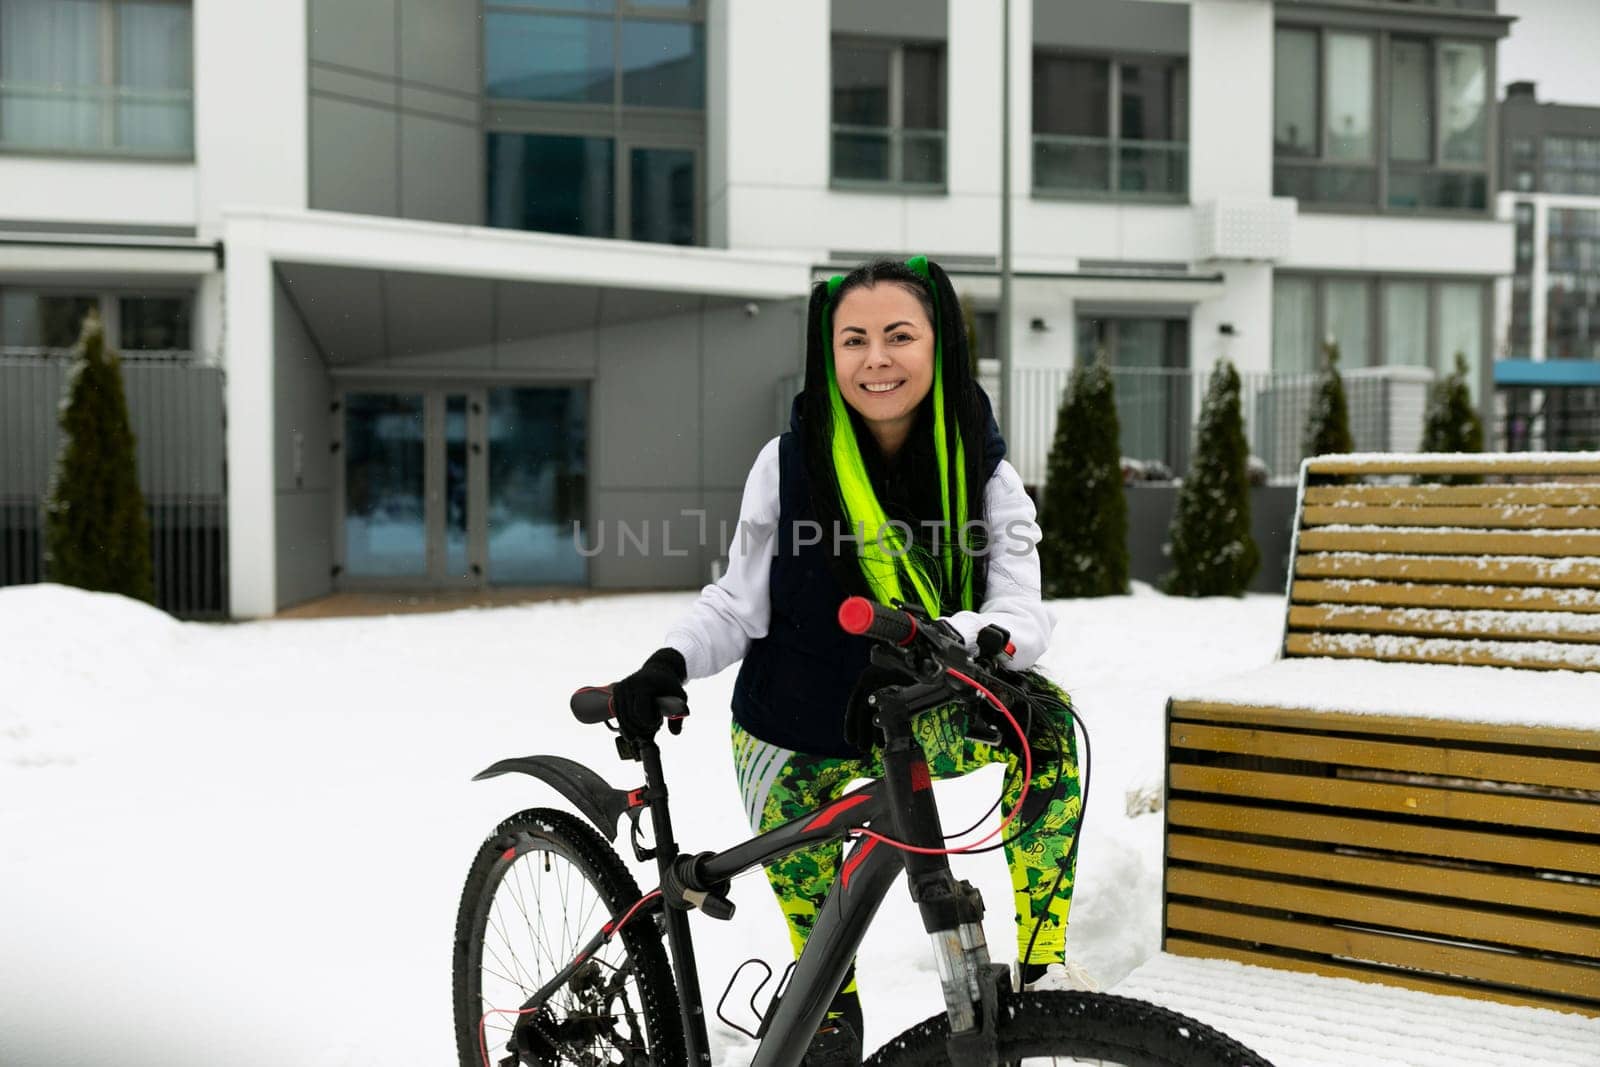 A woman standing next to a bicycle in a wintery landscape covered in snow. She is dressed warmly and appears to be inspecting the bike, which is slightly dusted with snow.